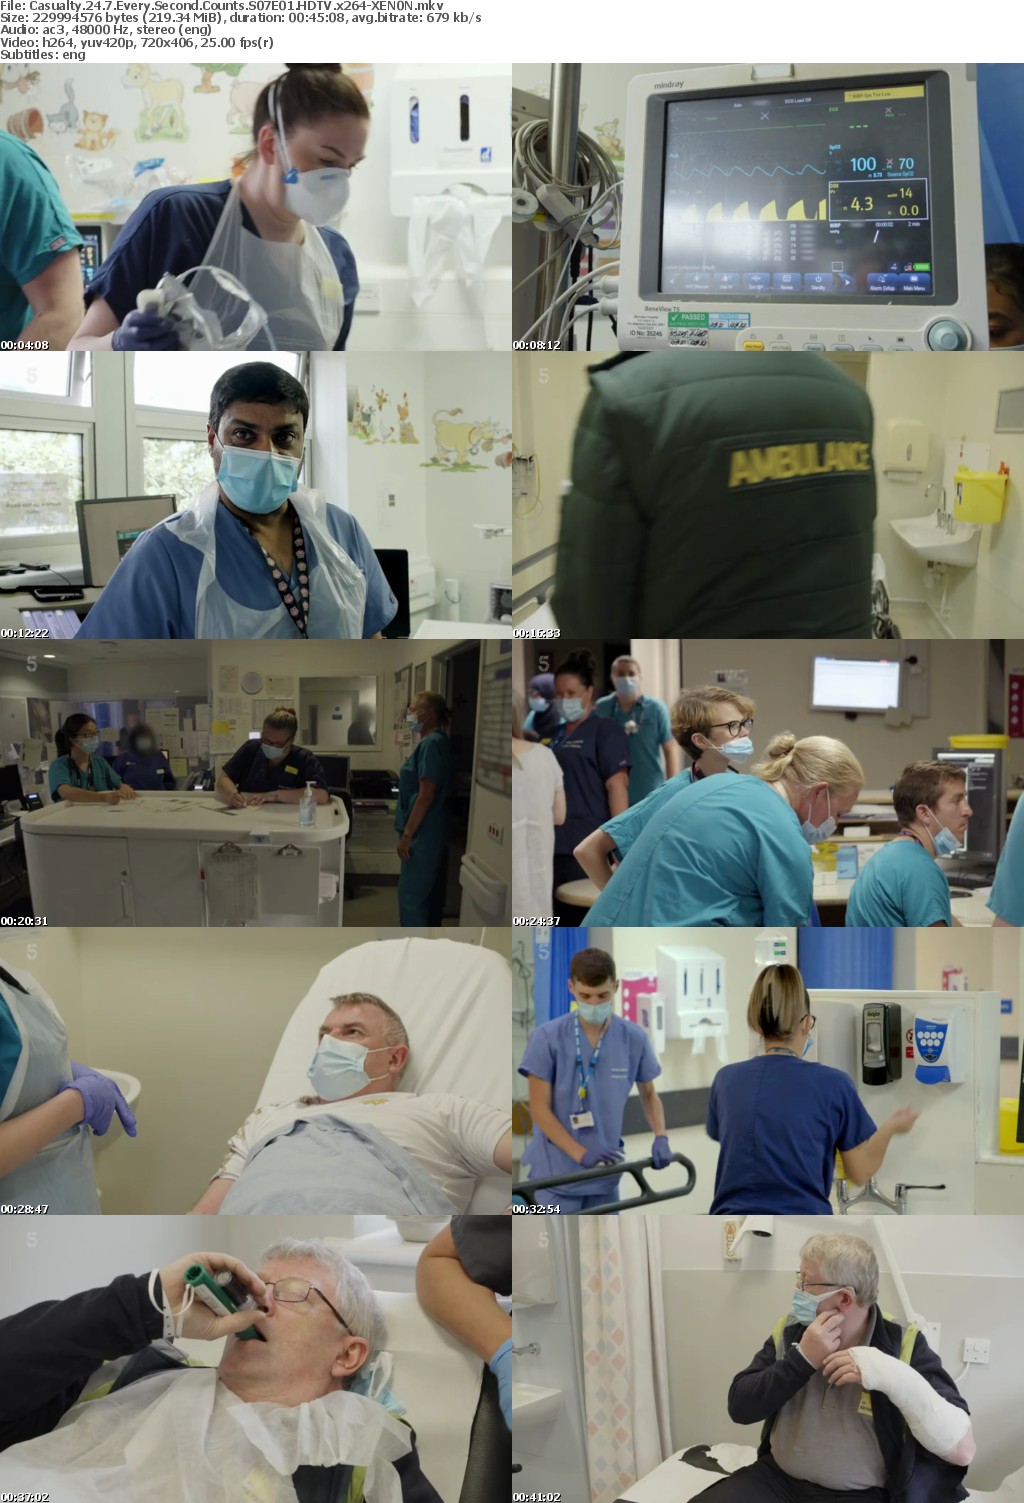 Casualty 24 7 Every Second Counts S07E01 HDTV x264-XEN0N